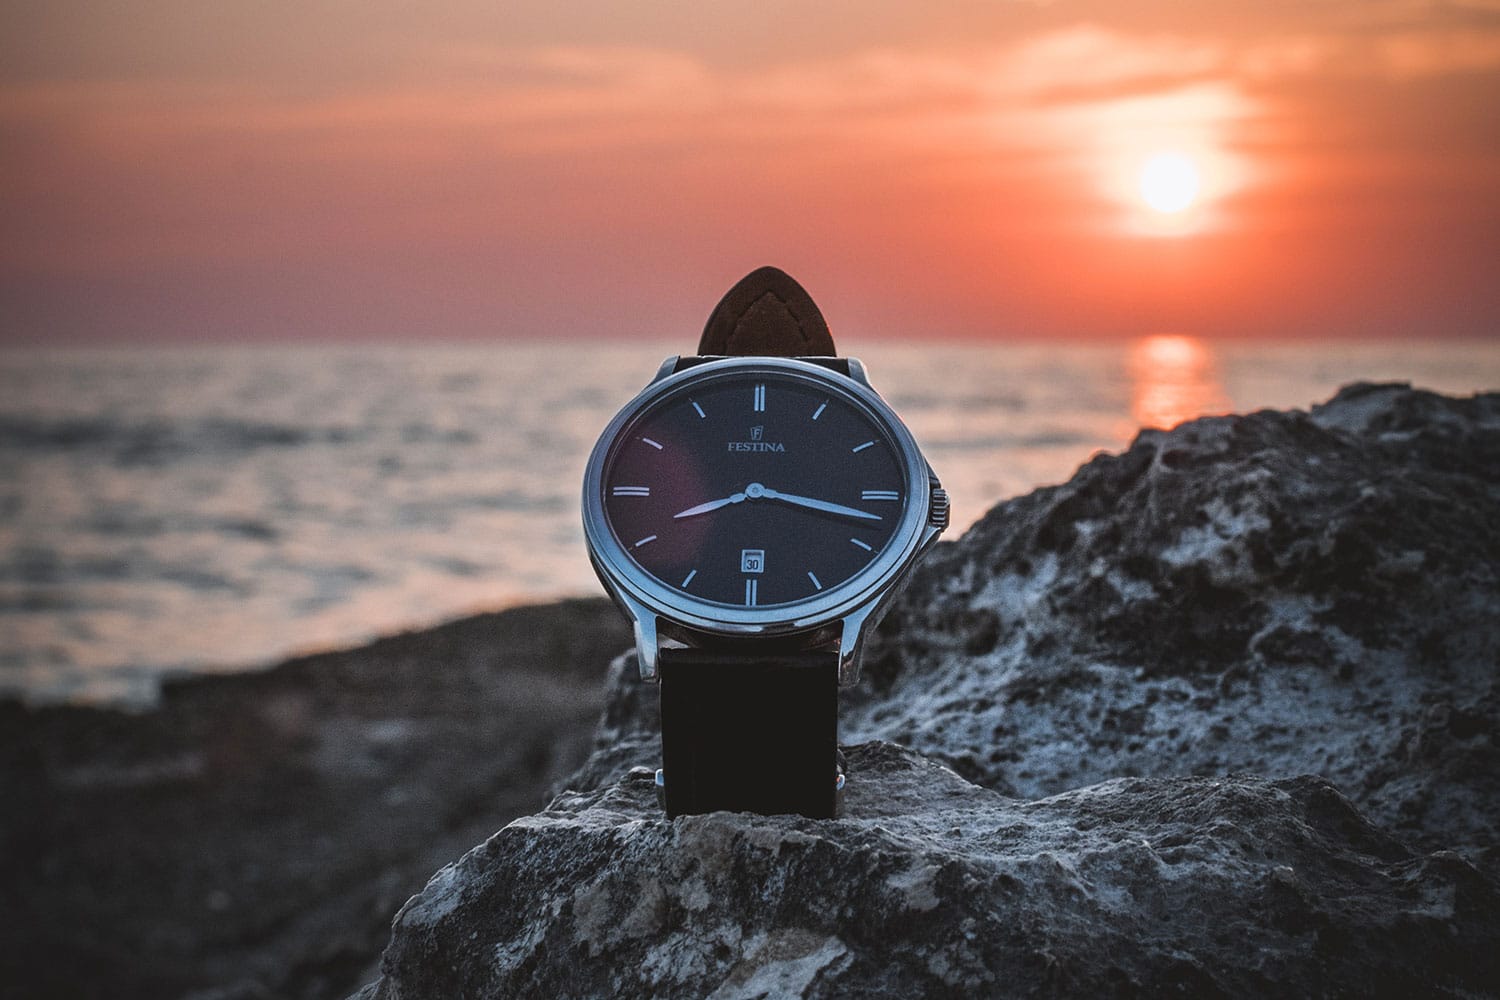 black dial watch pictured during sunset